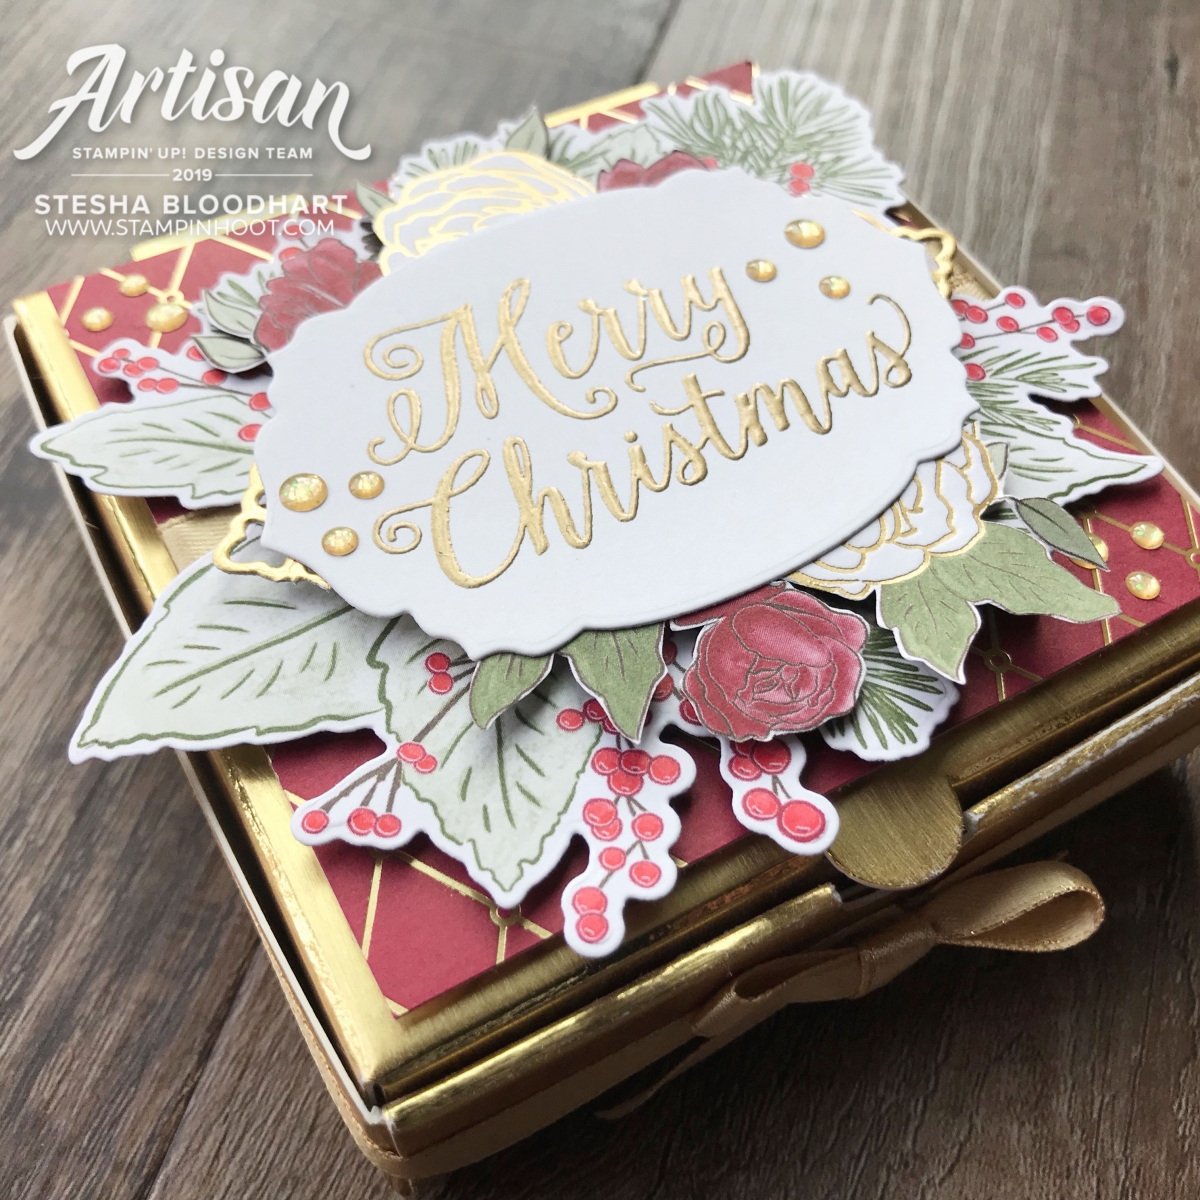 See a Silhouette Designer Series Paper by Stampin' Up! Card by Stesha Bloodhart, Stampin' Hoot! 2019 Artisan Design Team Member